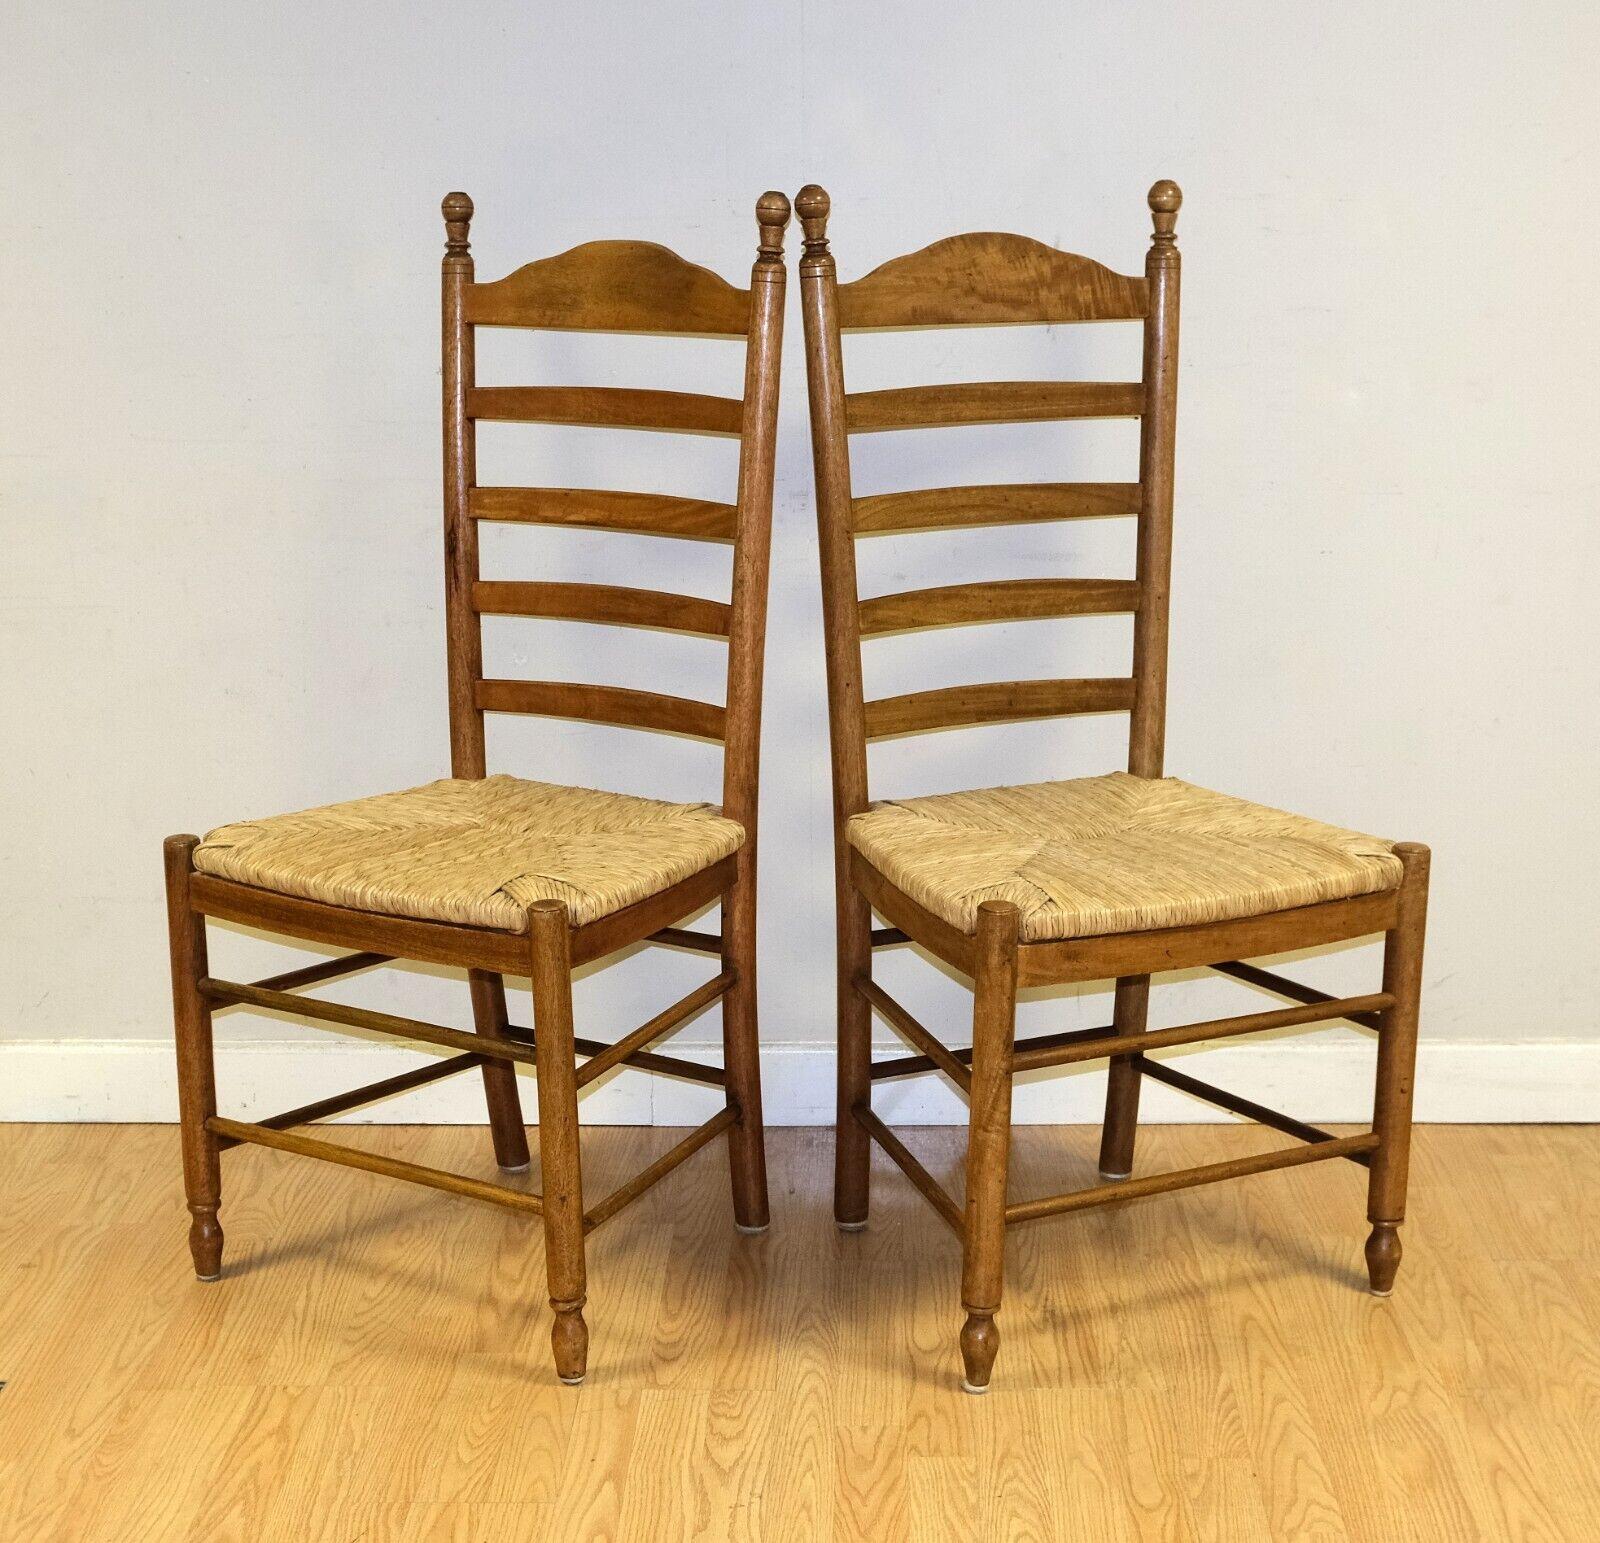 Hand-Crafted LOVELY SET OF 4 OAK FARMHOUSE RUSH SEAT LADDER BACK DiNING CHAIRS